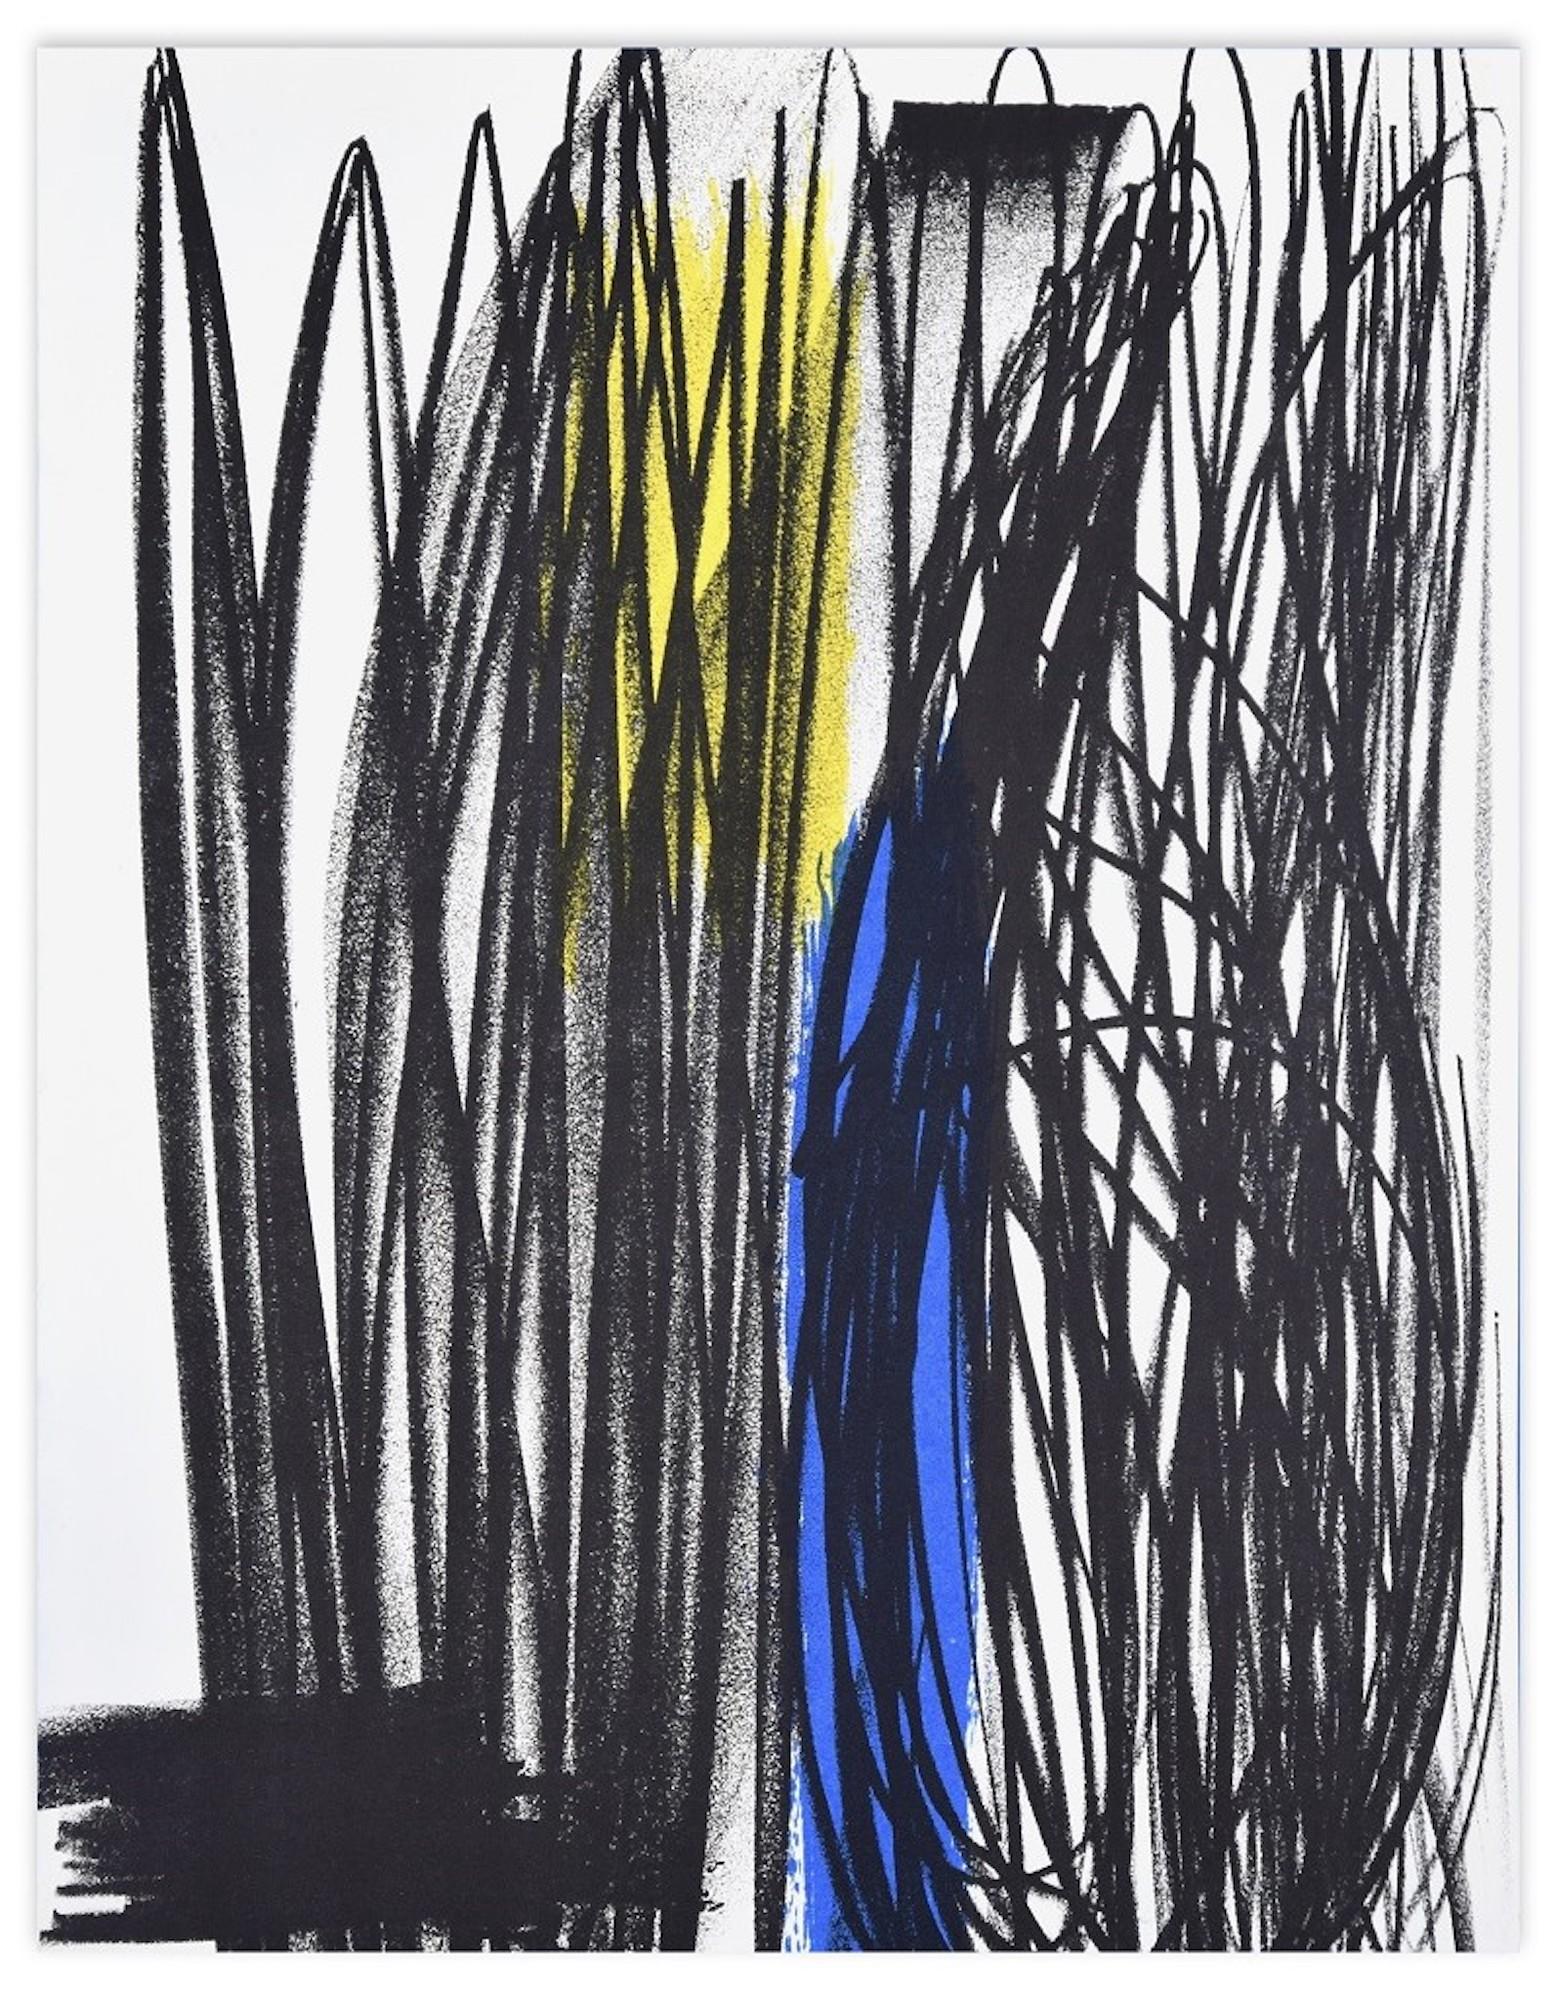 Influence is an original colored print realized by Hans Hartung in 1975.

It comes from the portfolio "San Lazzaro et ses Amis. Hommage au fondateur de la revue XXe siècle" published by XXe Siècle, Paris, in 1973 and printed by Mourlot. Unsigned and